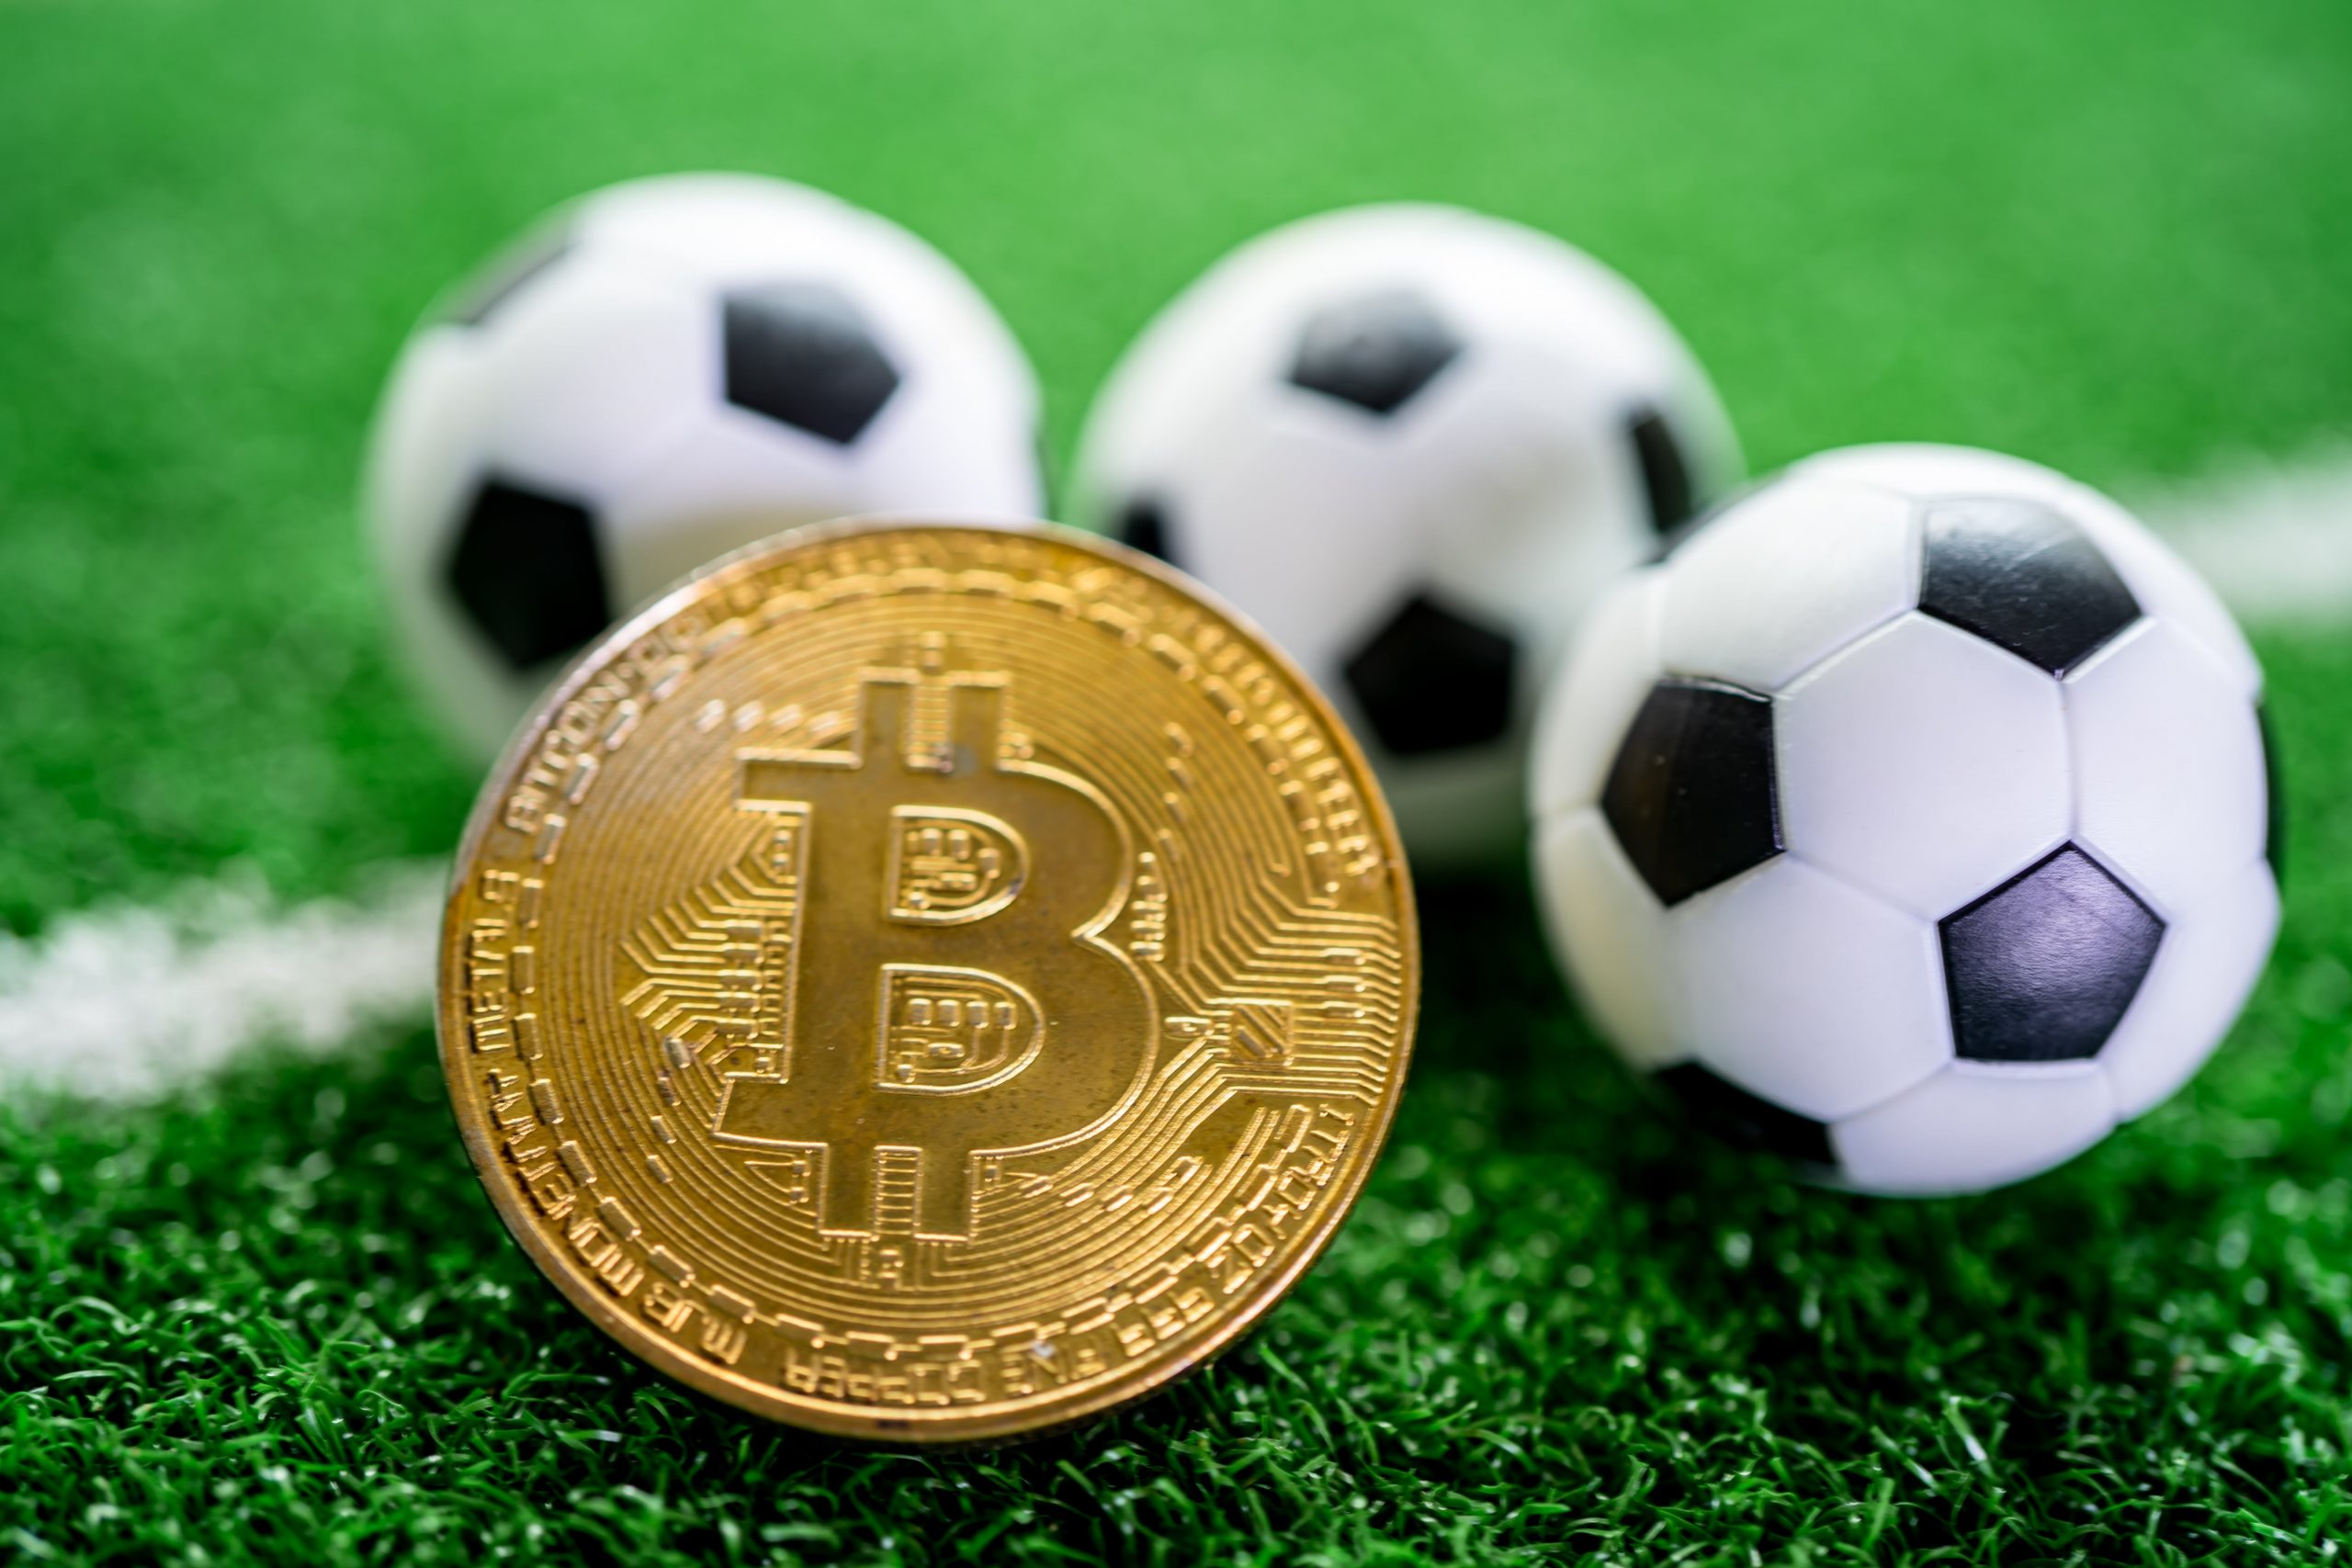 Different Sports to Bet Using Bitcoin